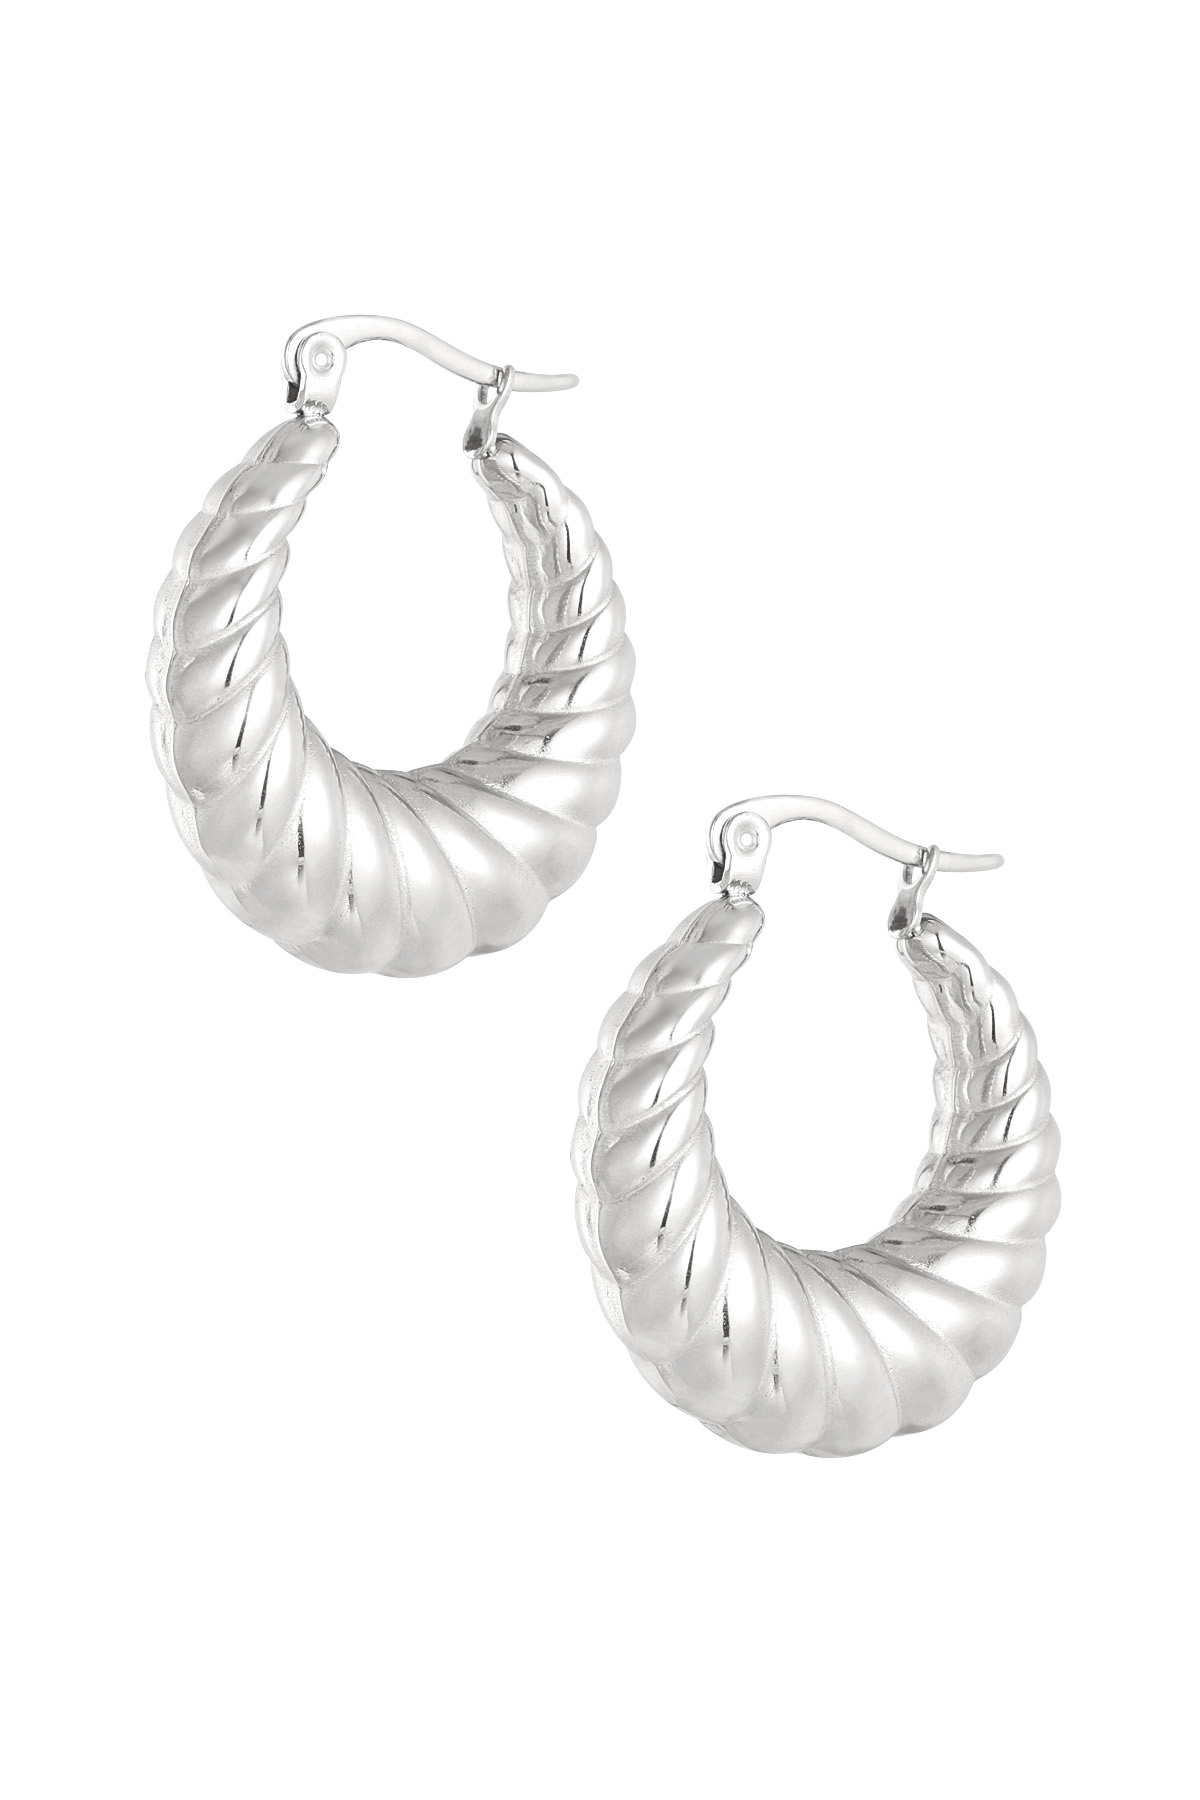 Earrings aesthetic twisted - silver h5 